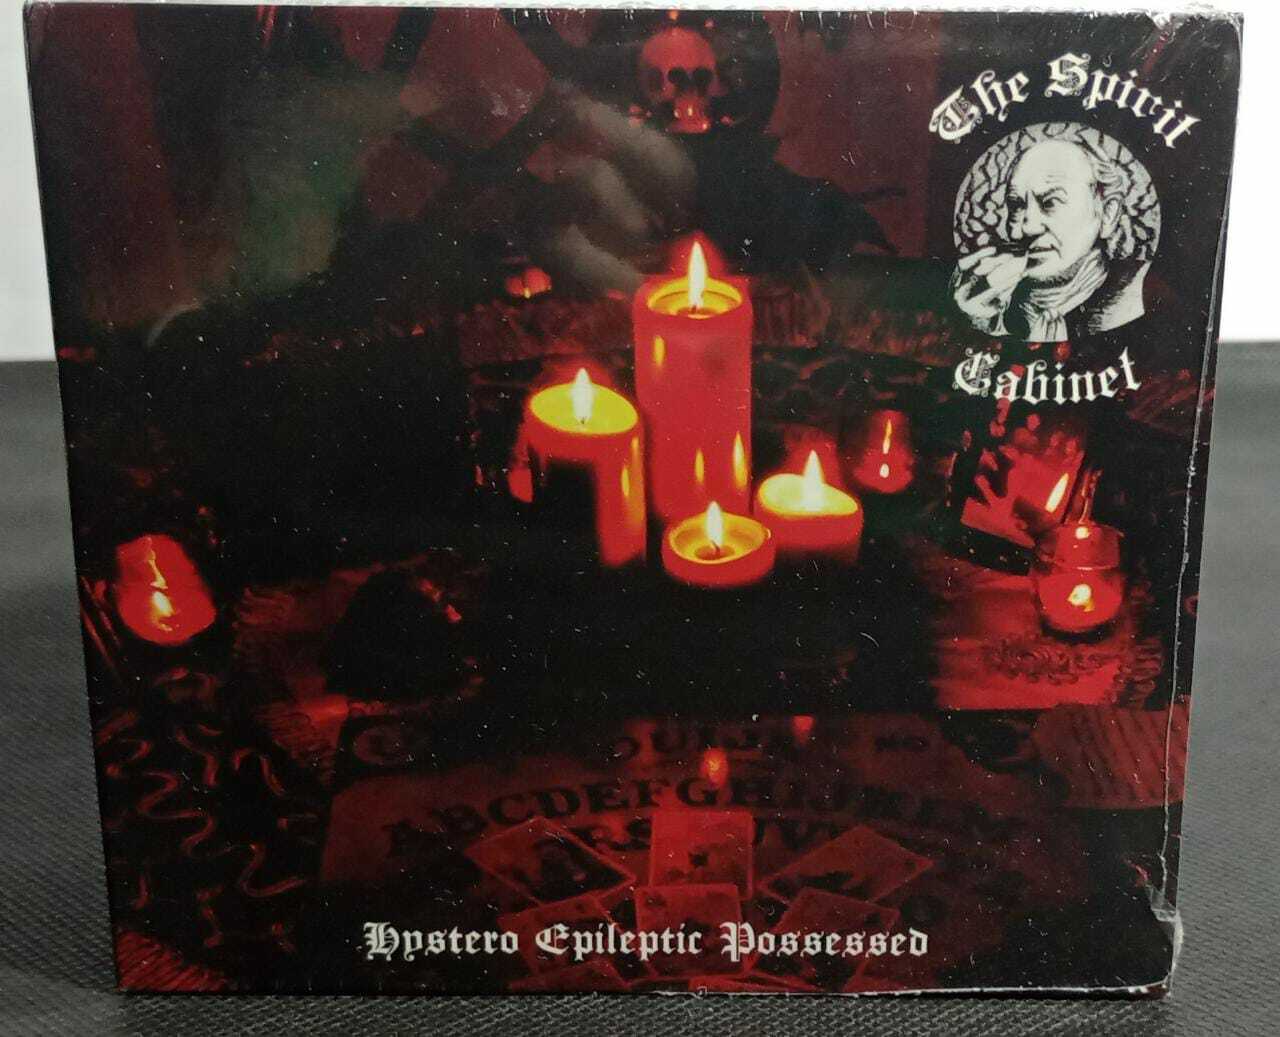 CD - Spirit Cabinet The - Hystero Epileptic Possessed (Digipack/Germany/Lacrado)